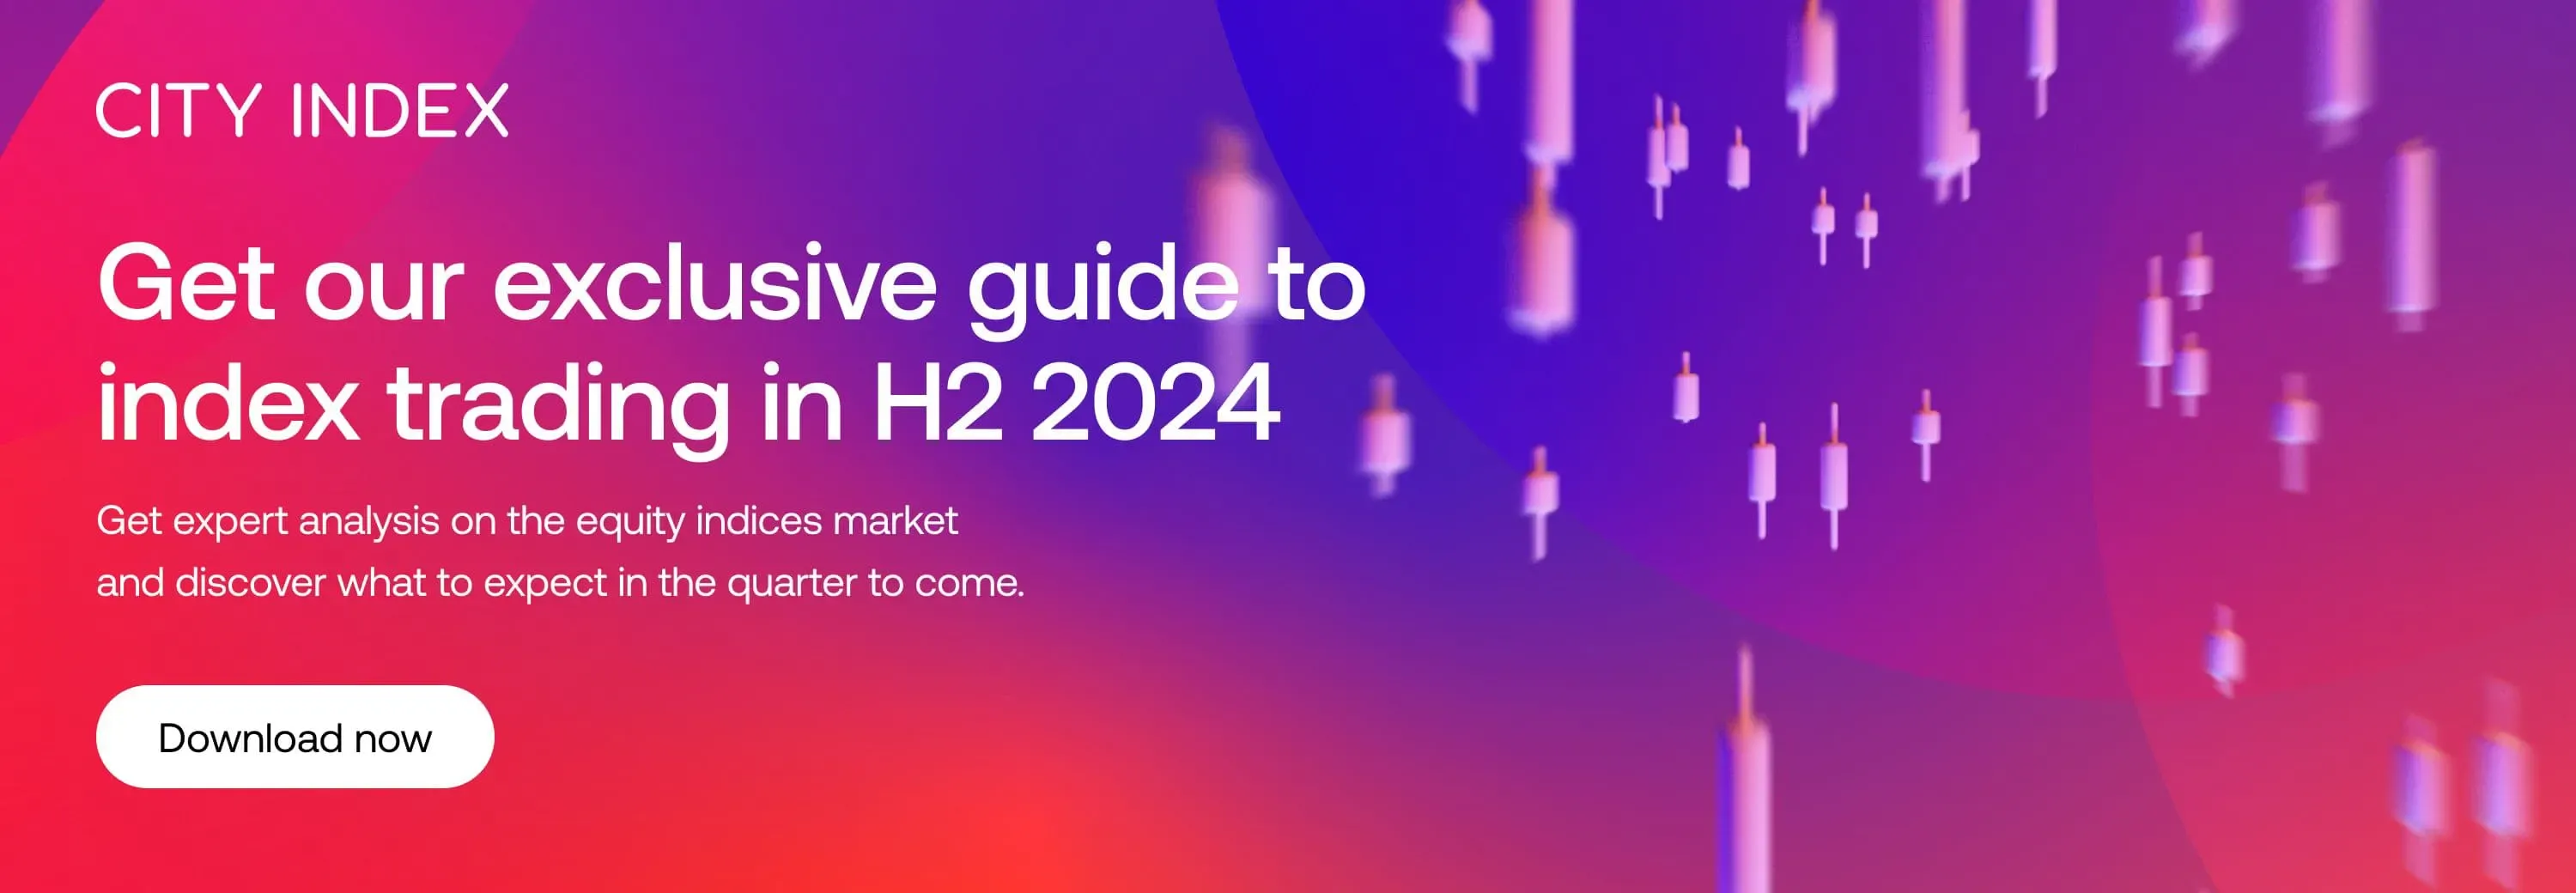 Get our exclusive guide to index trading in H2 2024